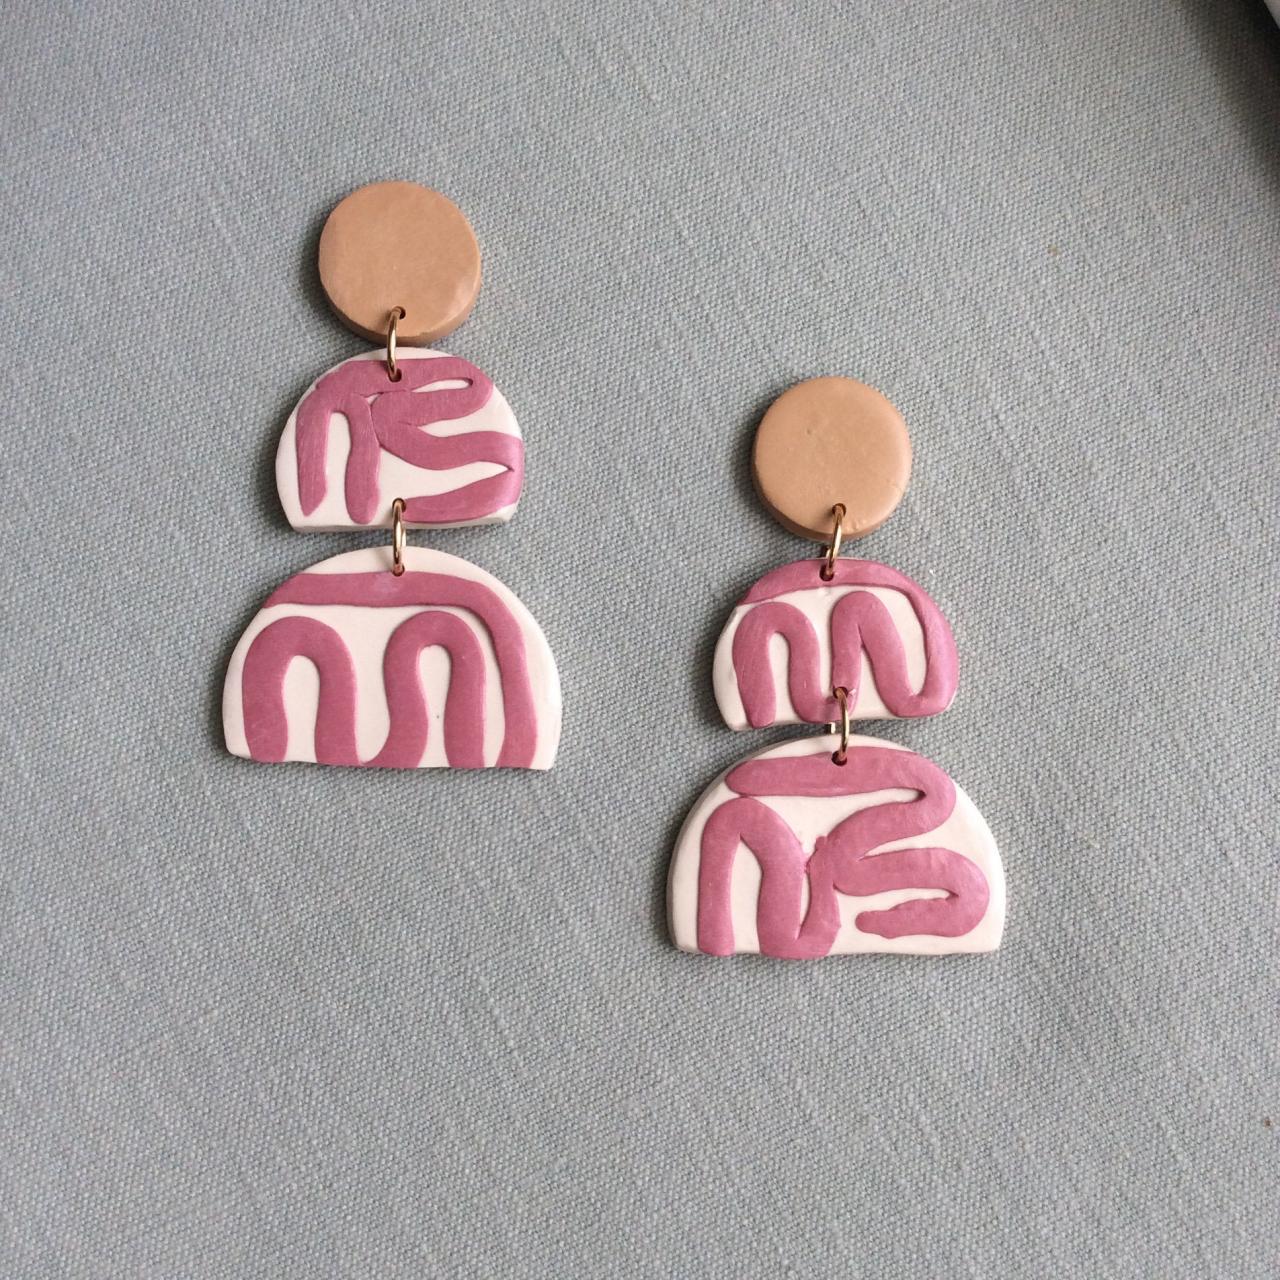 Aurelia In Beige, Mauve, And Cream Polymer Clay Statement Earrings | Unique Contemporary Polymer Clay Dangle Earrings